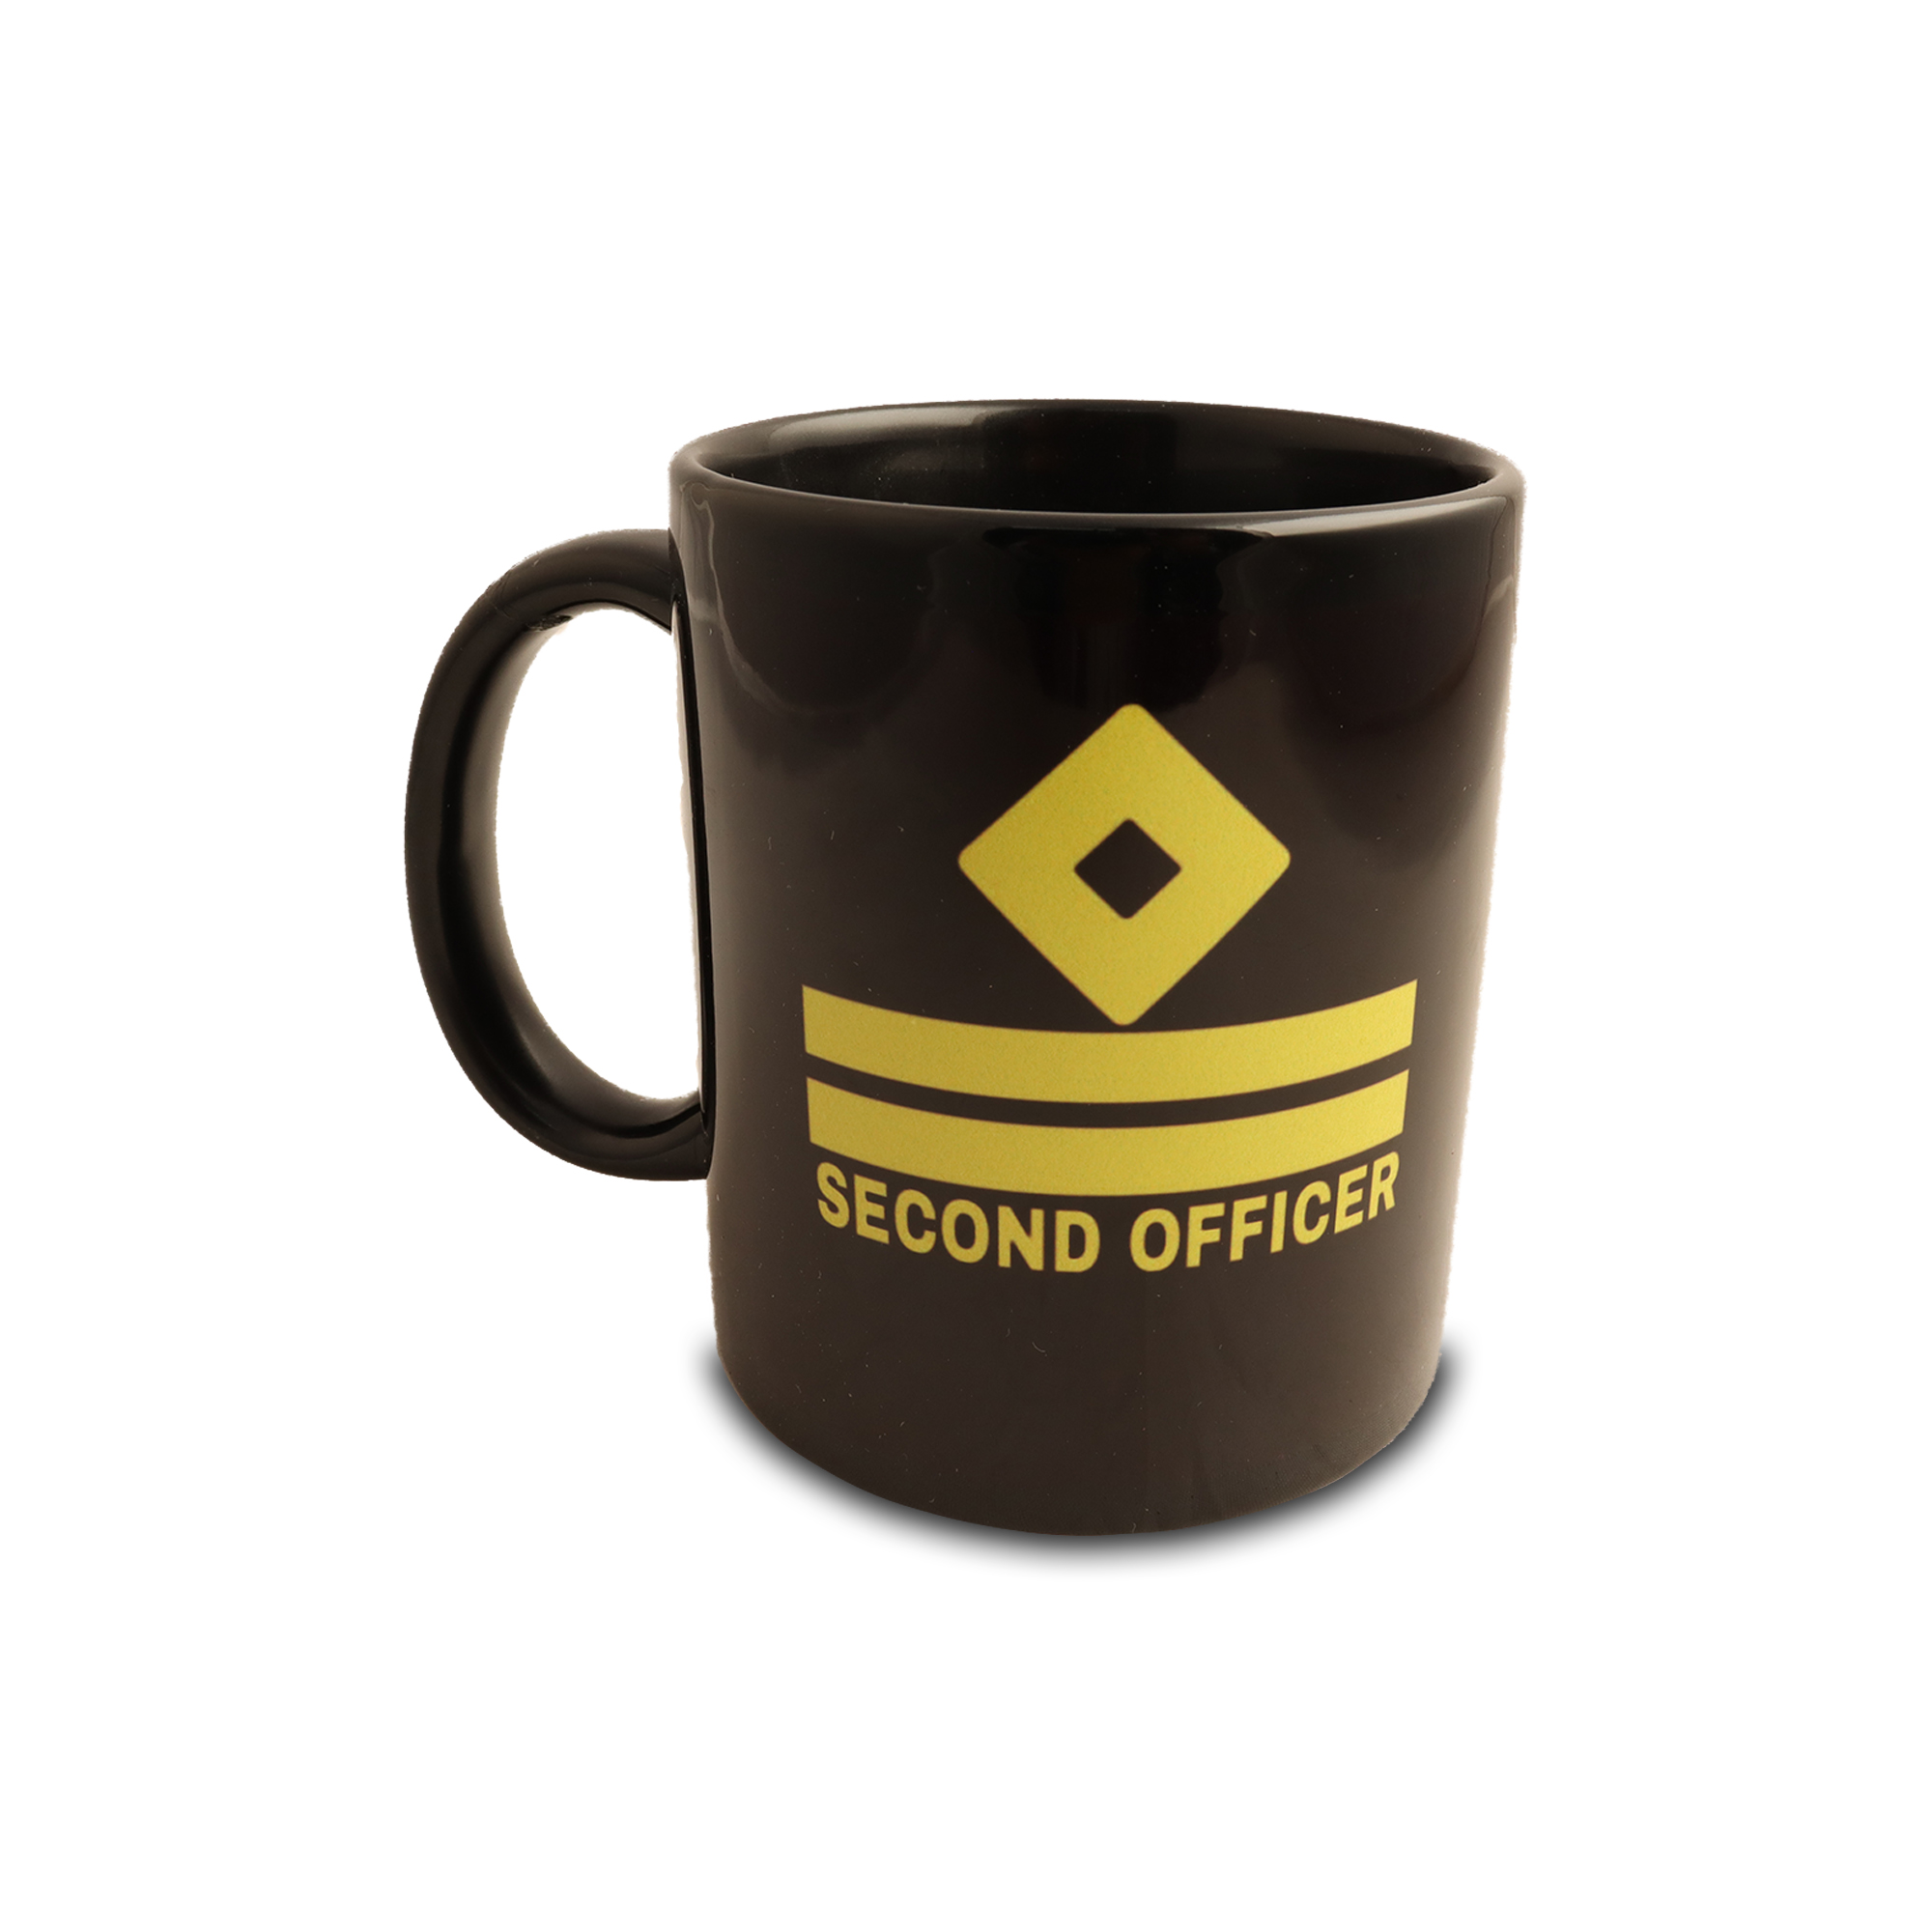 Second Officer Coffee Mug / Cup